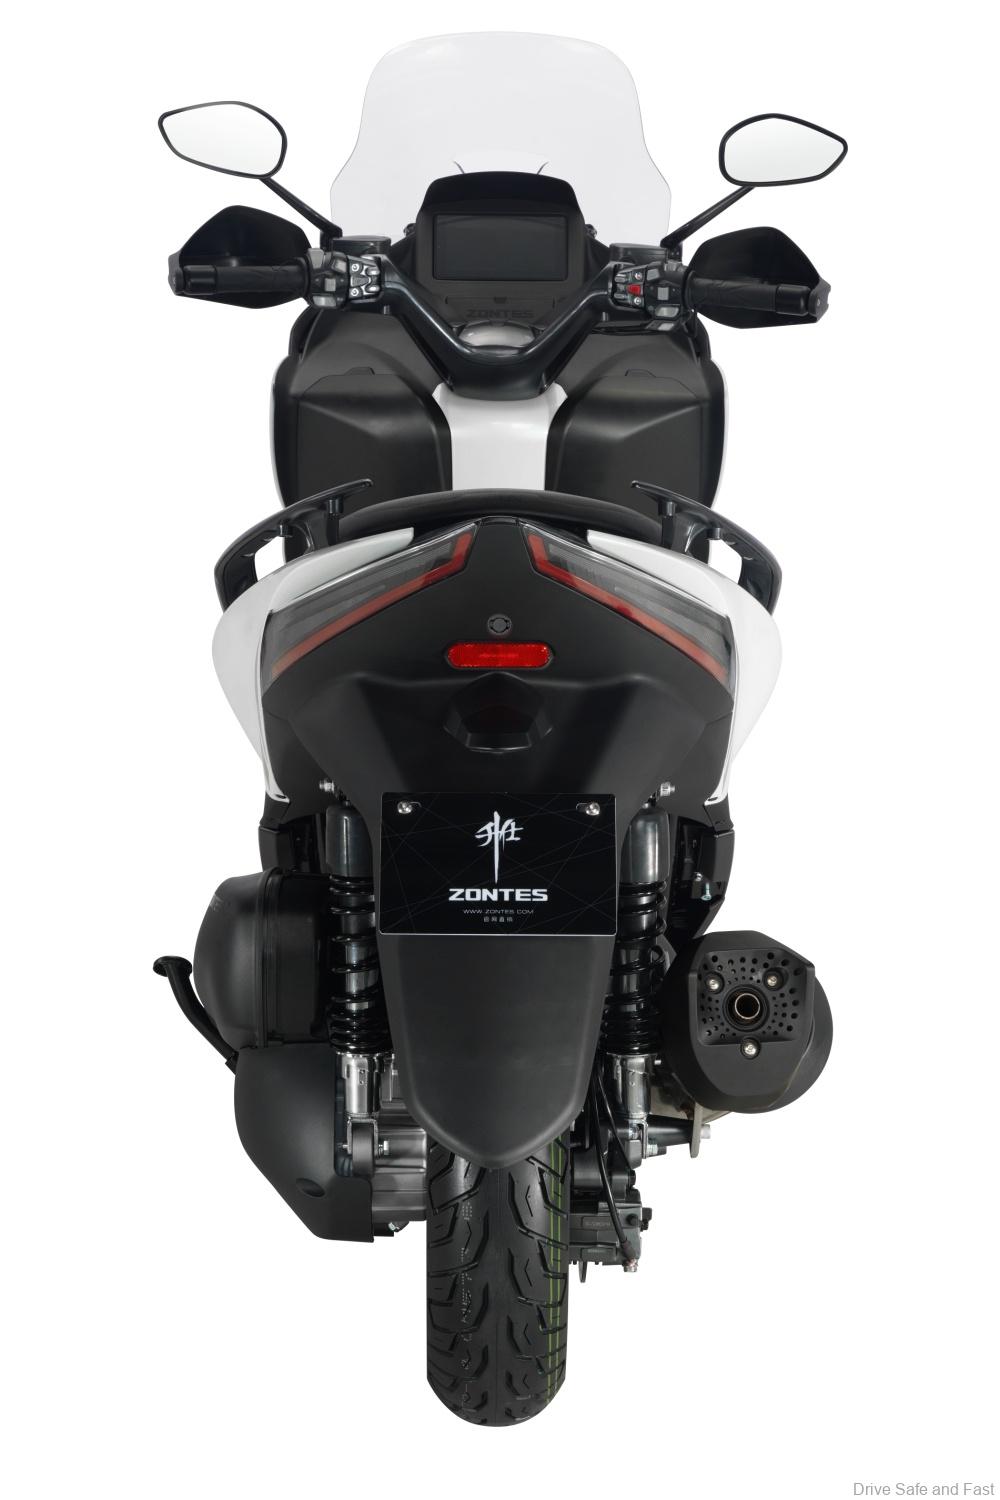 Zontes 350 Series Scooters Debut In Malaysia From RM23,800